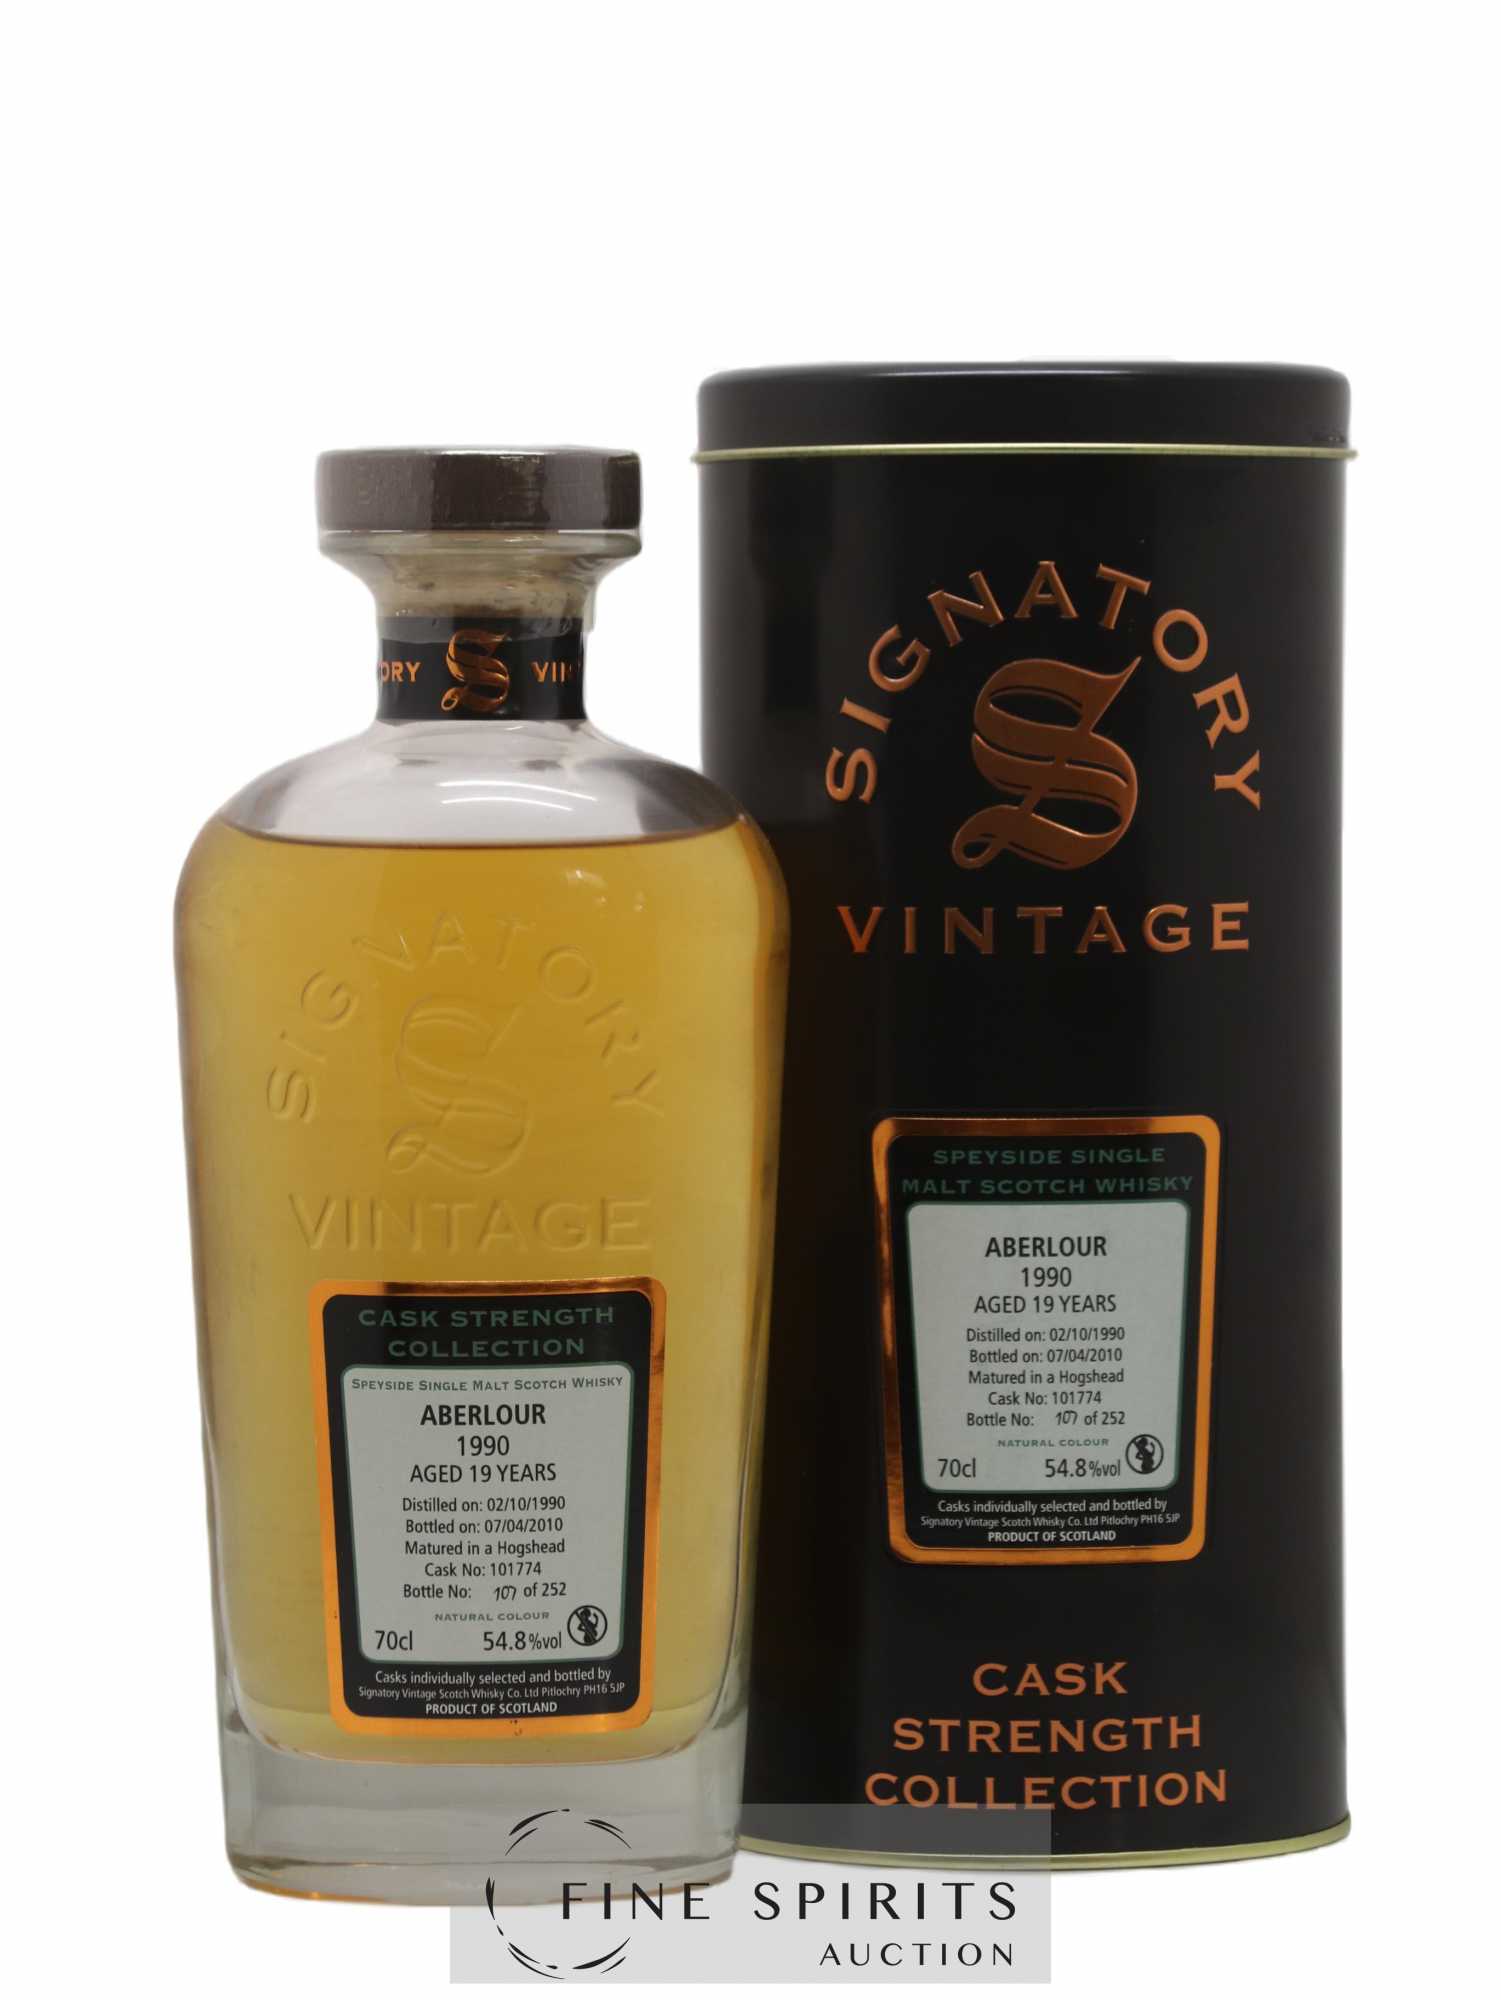 Aberlour 19 years 1990 Signatory Vintage Cask n°101774 - One of 252 - bottled 2010 Cask Strength Collection